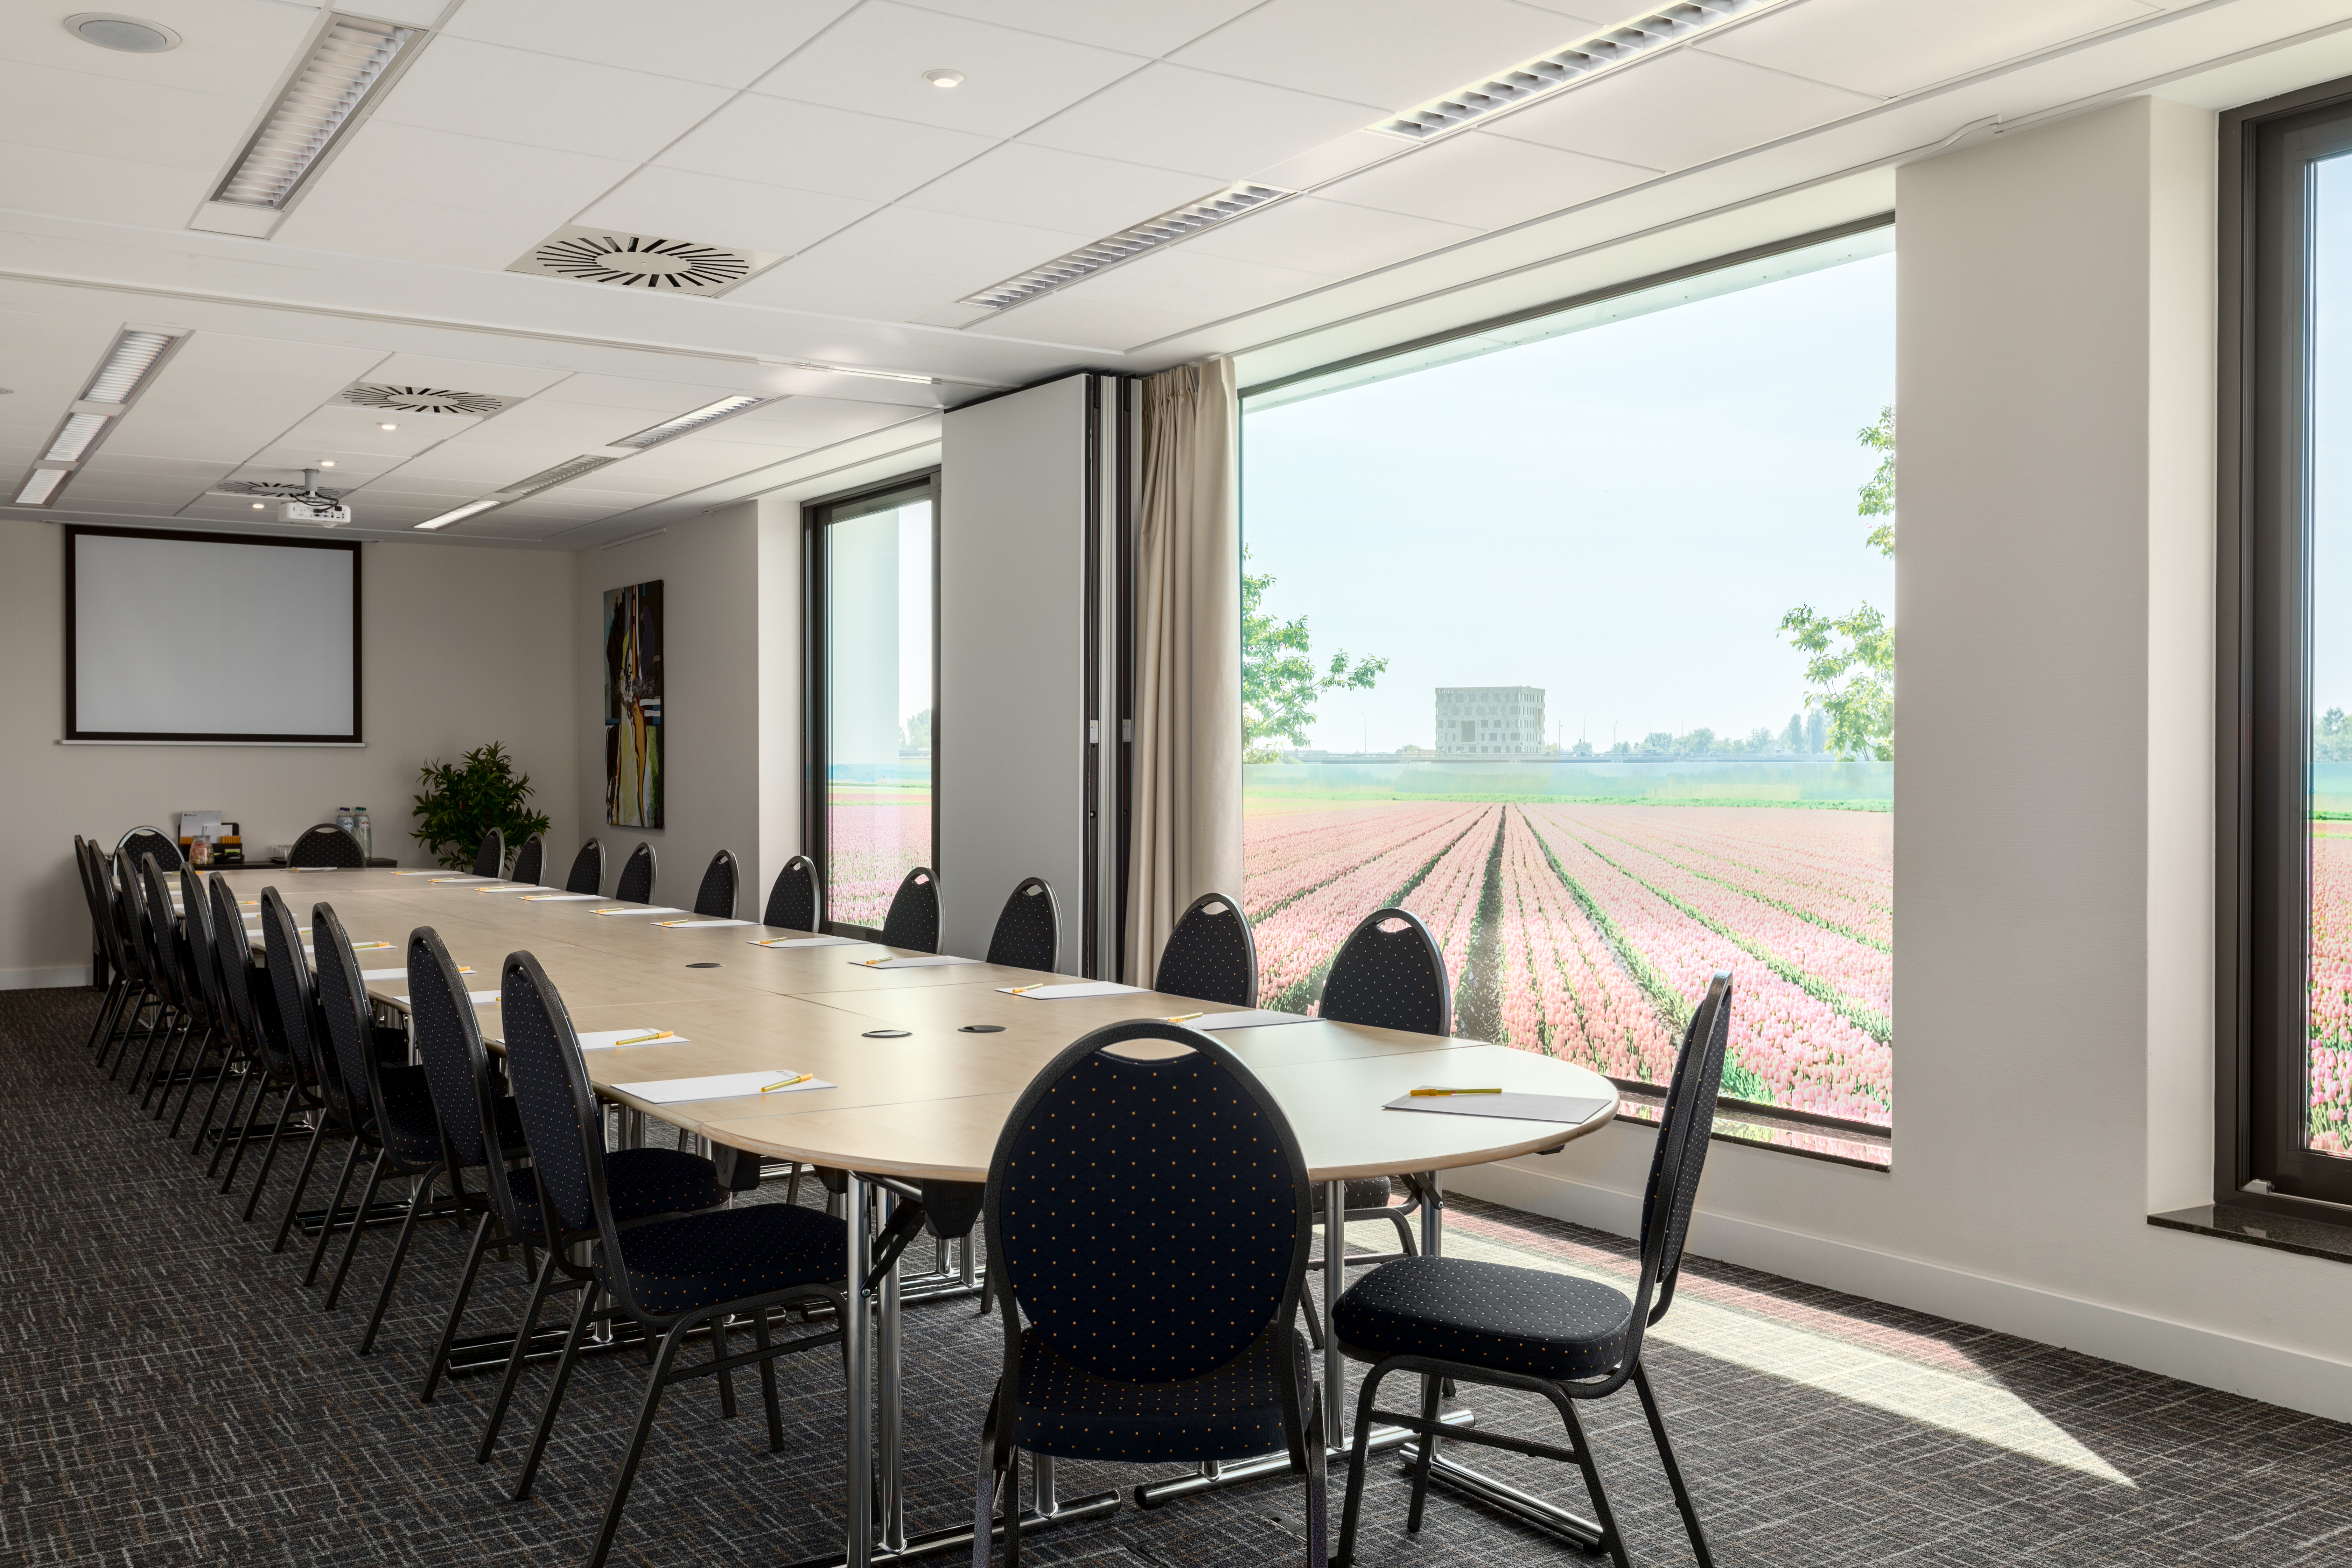 Meeting Room with long conference table.